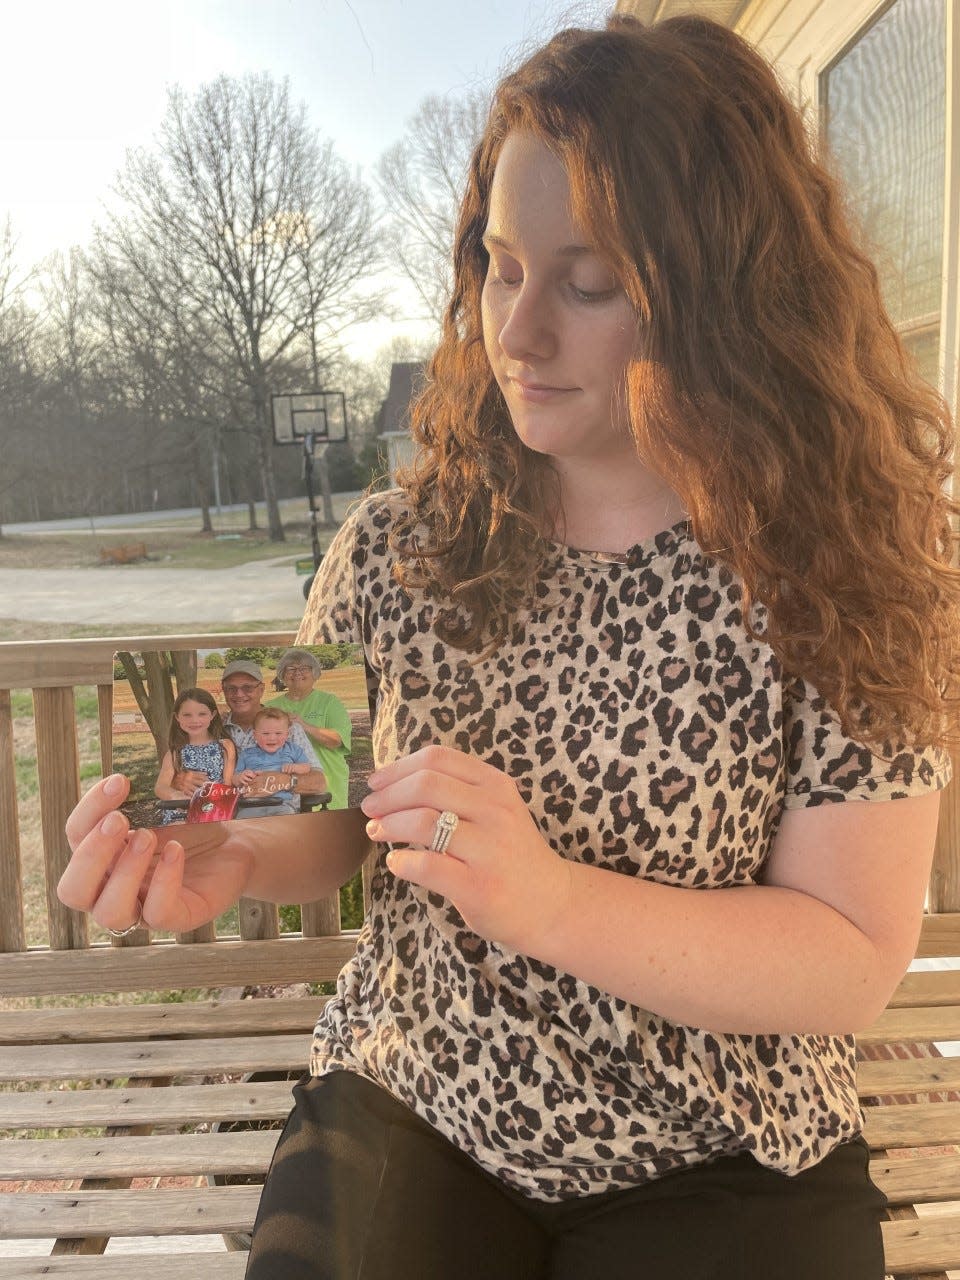 Shelby Crump holds a photo of her grandmother, Dot Hyde, who was killed in a hit and run in January. Police are still seeking the driver.